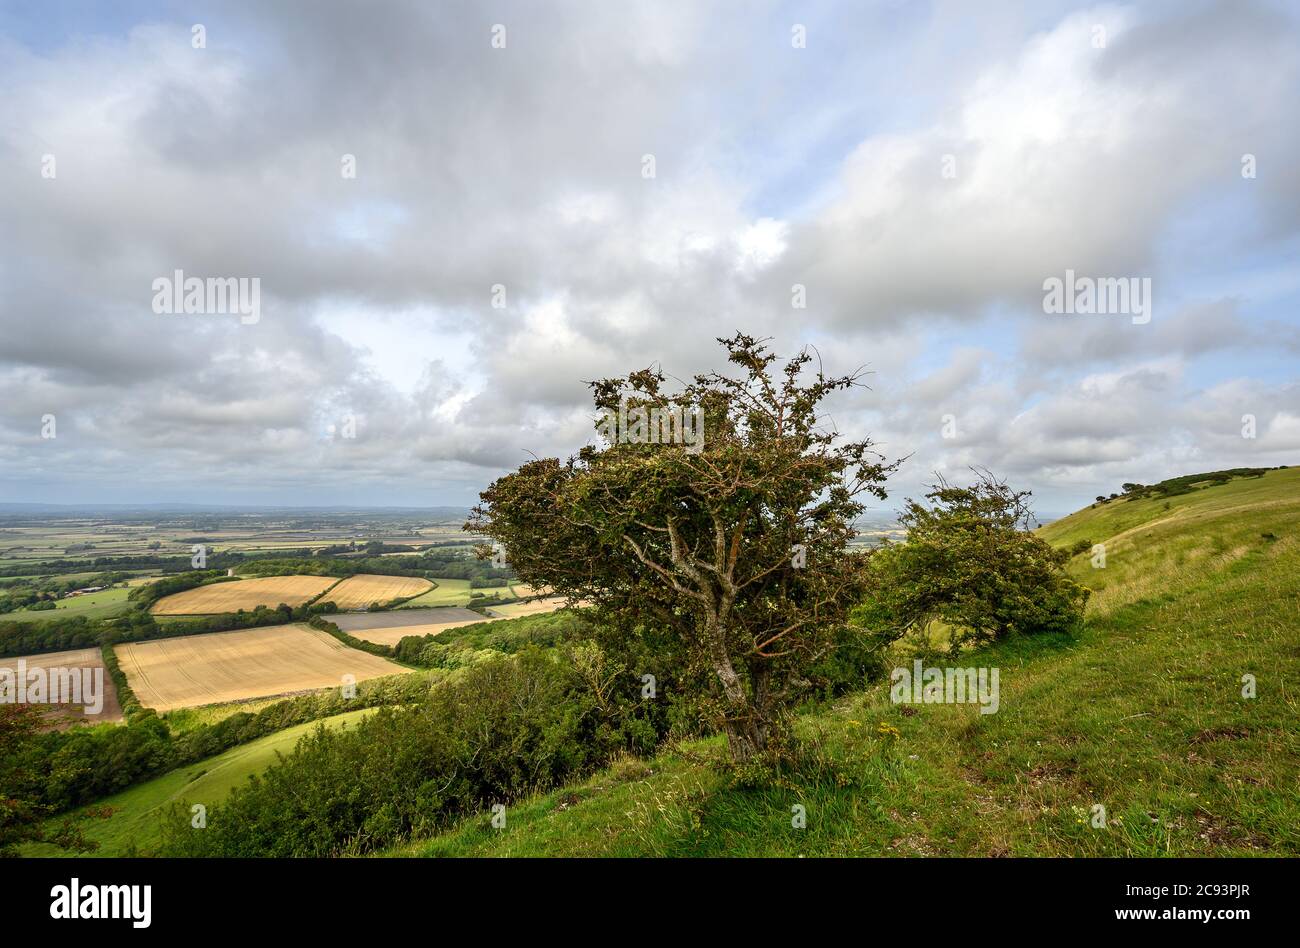 South Downs National Park, Sussex, UK near Firle Beacon. A tree on the route of the South Downs Way with views over the Weald. Stock Photo